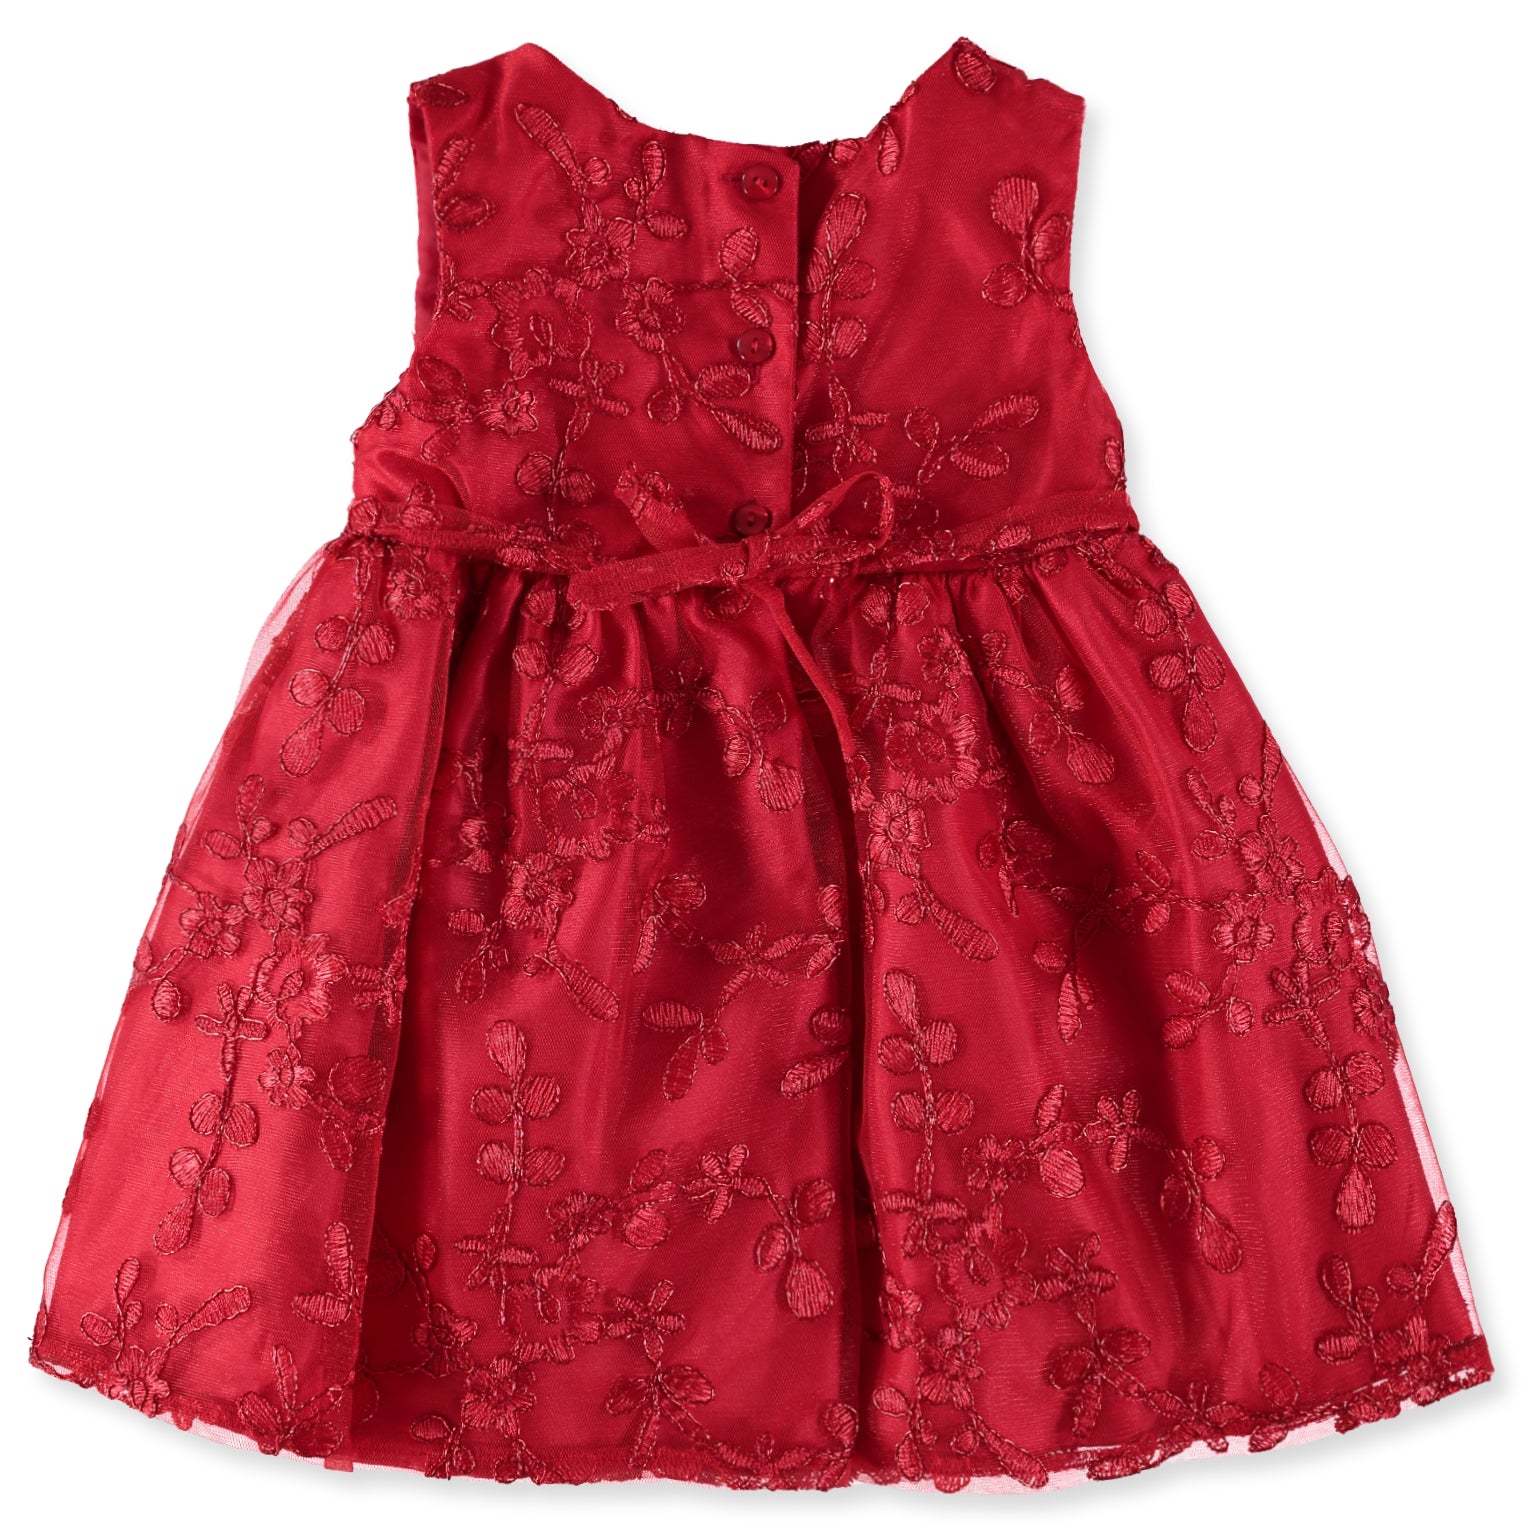 Youngland Girls 12-24 Months Floral Lace Dress